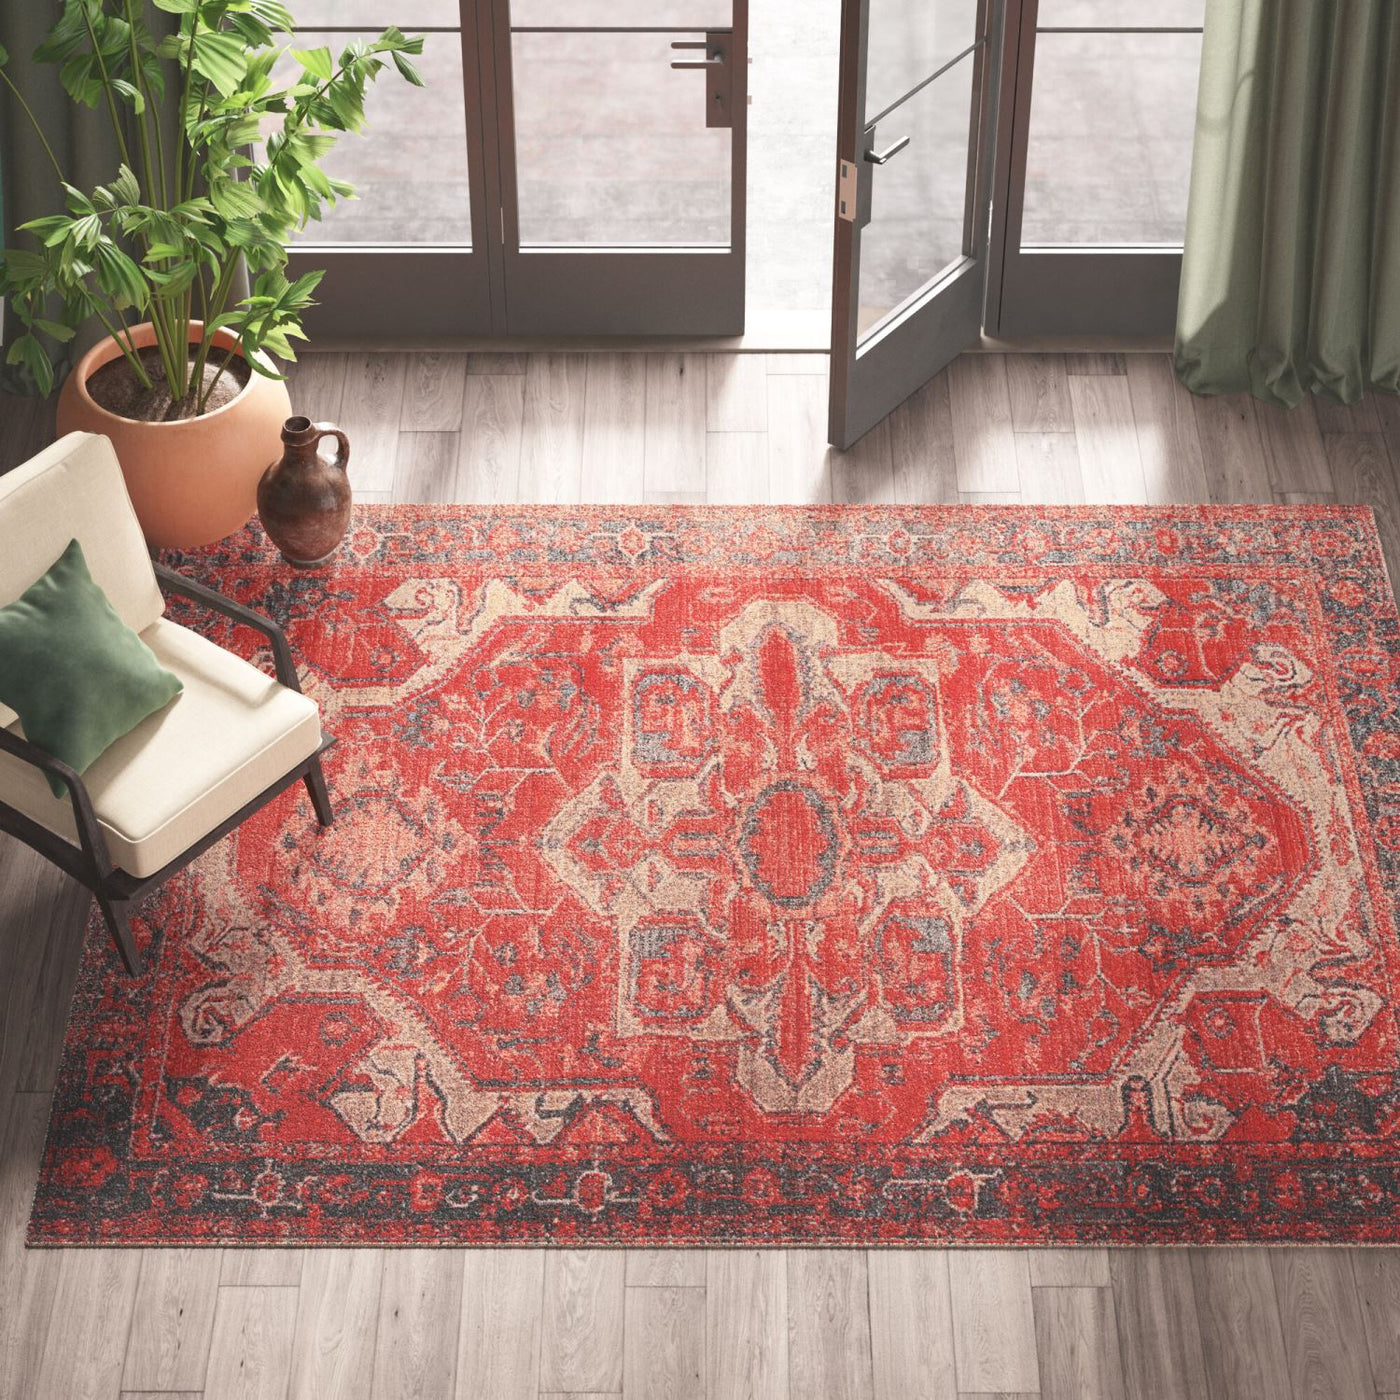 Mikras VII Area Rug - 5' X 7'6" - Red/Blue